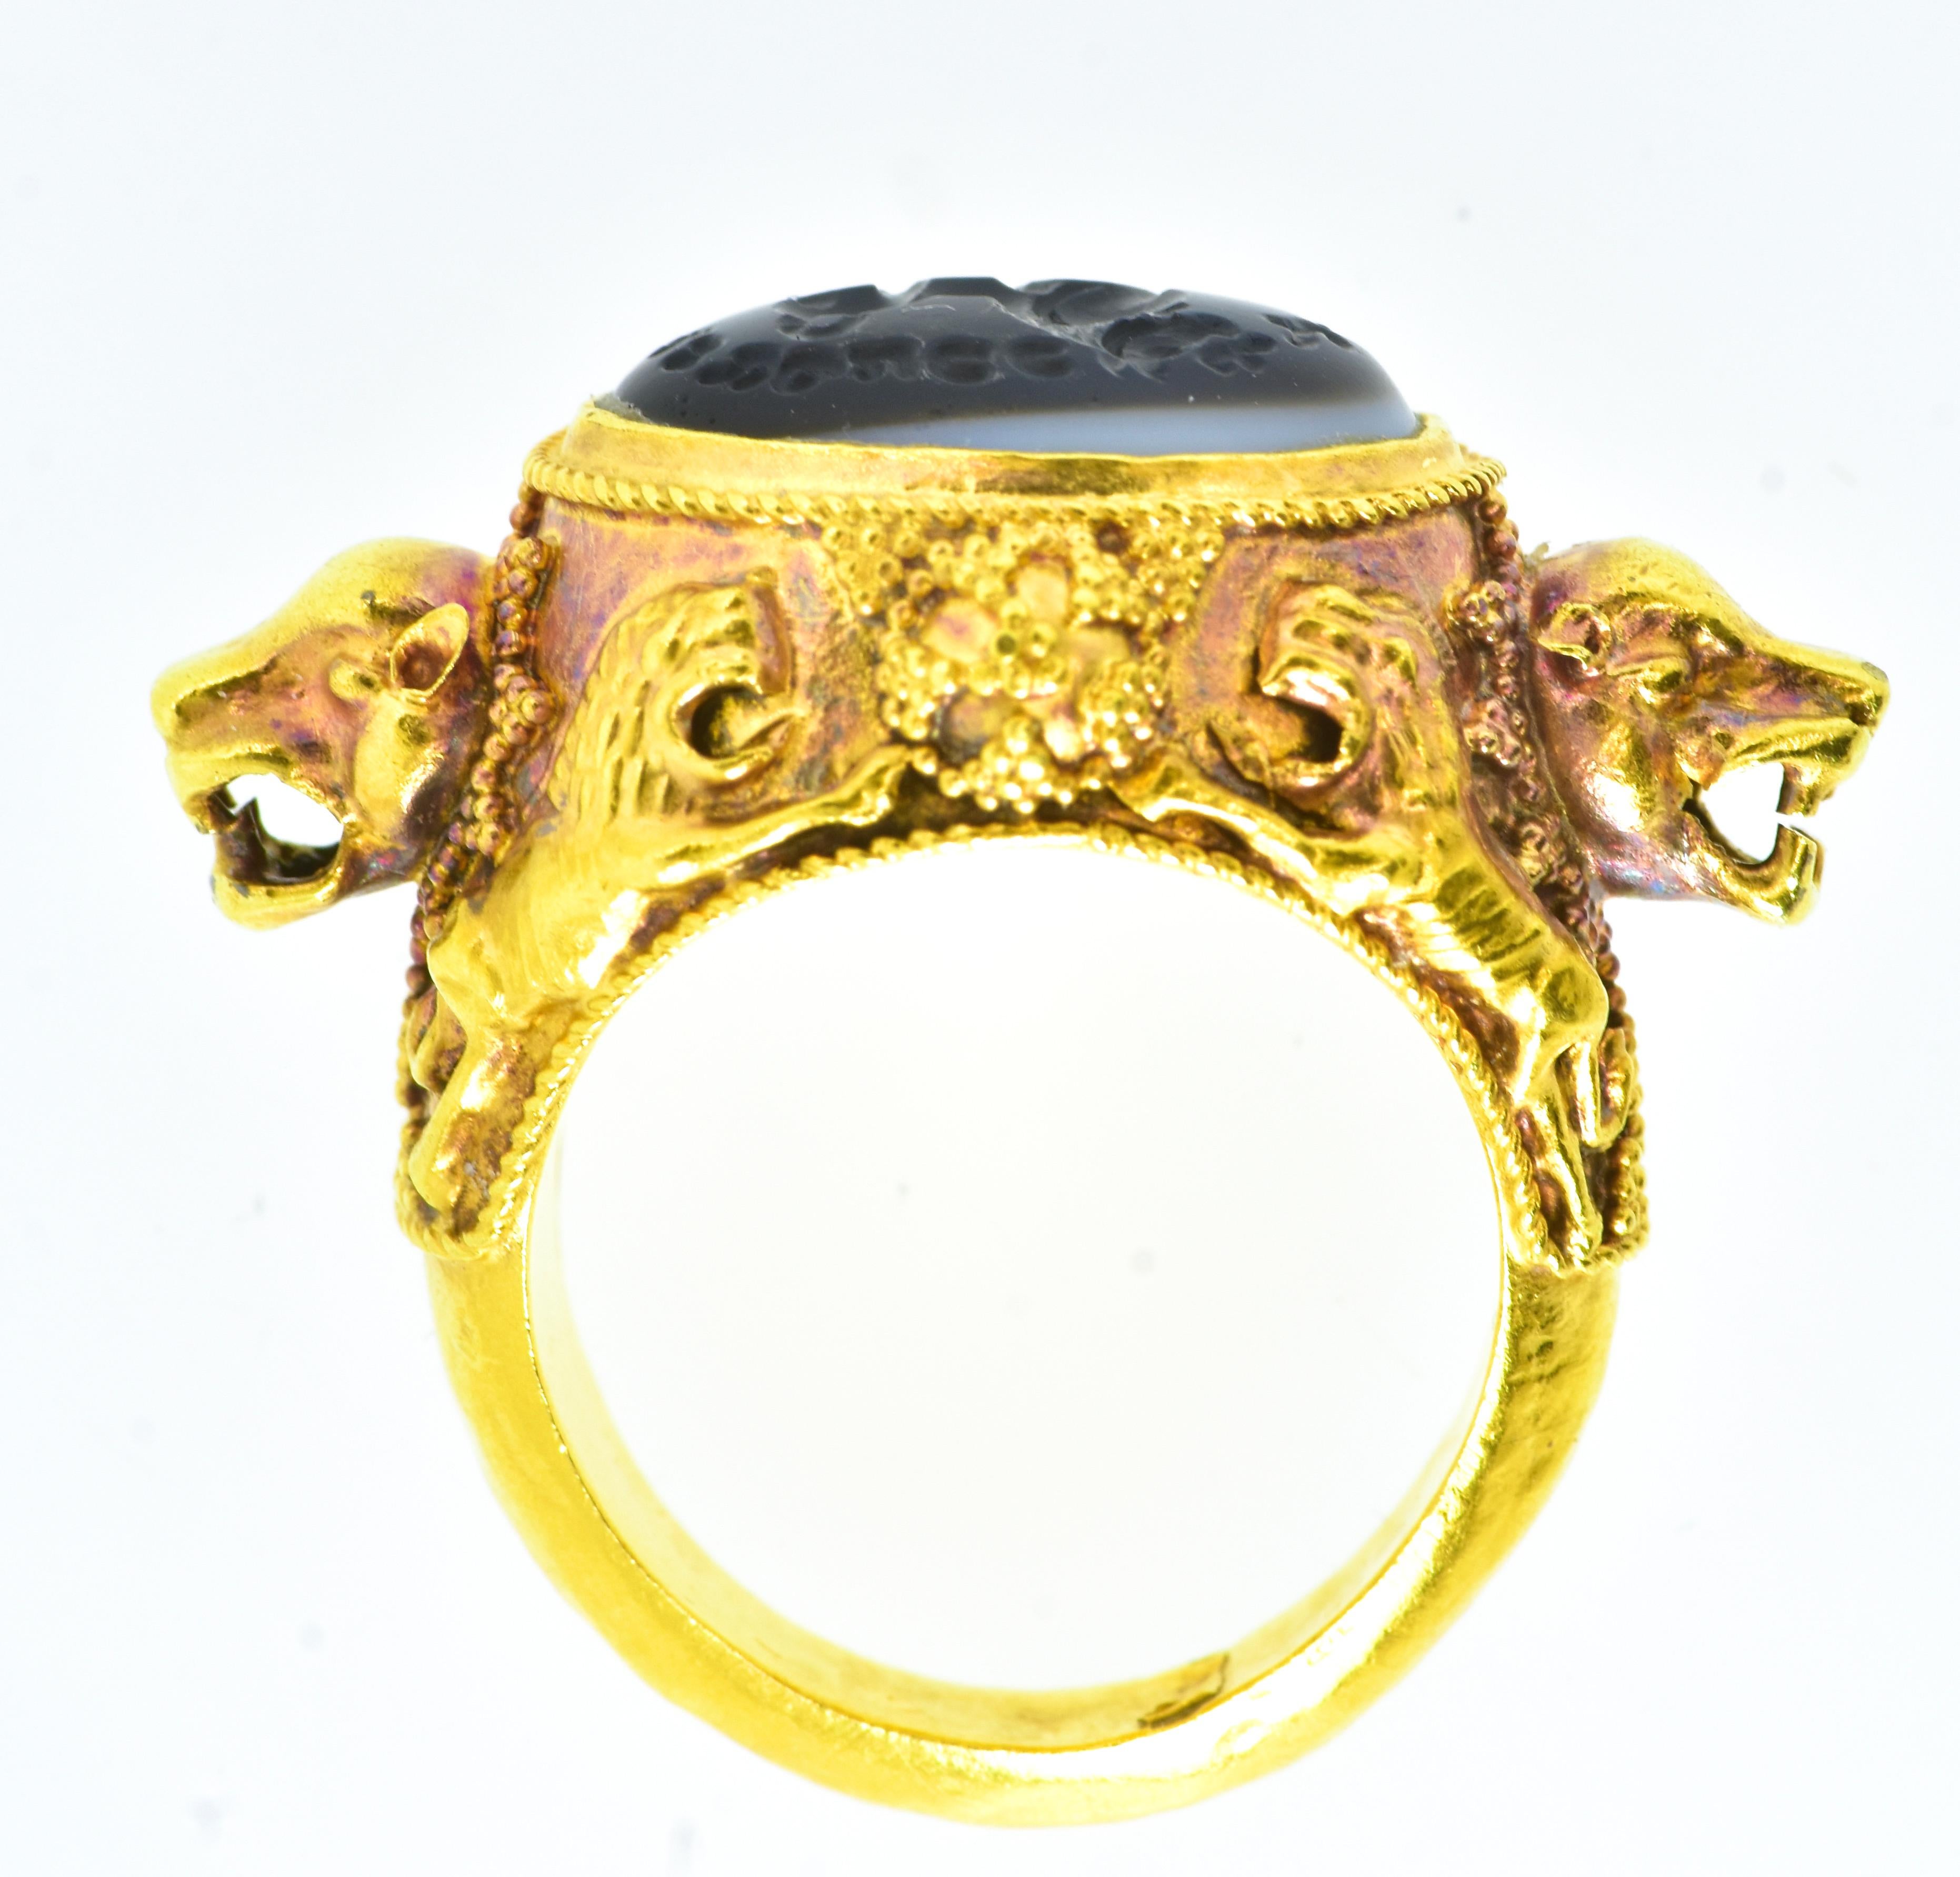 Antique intaglio carved in banded agate in an ornate 18K yellow gold ring.  The  center carving, probably Roman, is of a striding lion.  There appears to be an ancient writing on the periphery of the stone which we cannot decipher.
On each shoulder